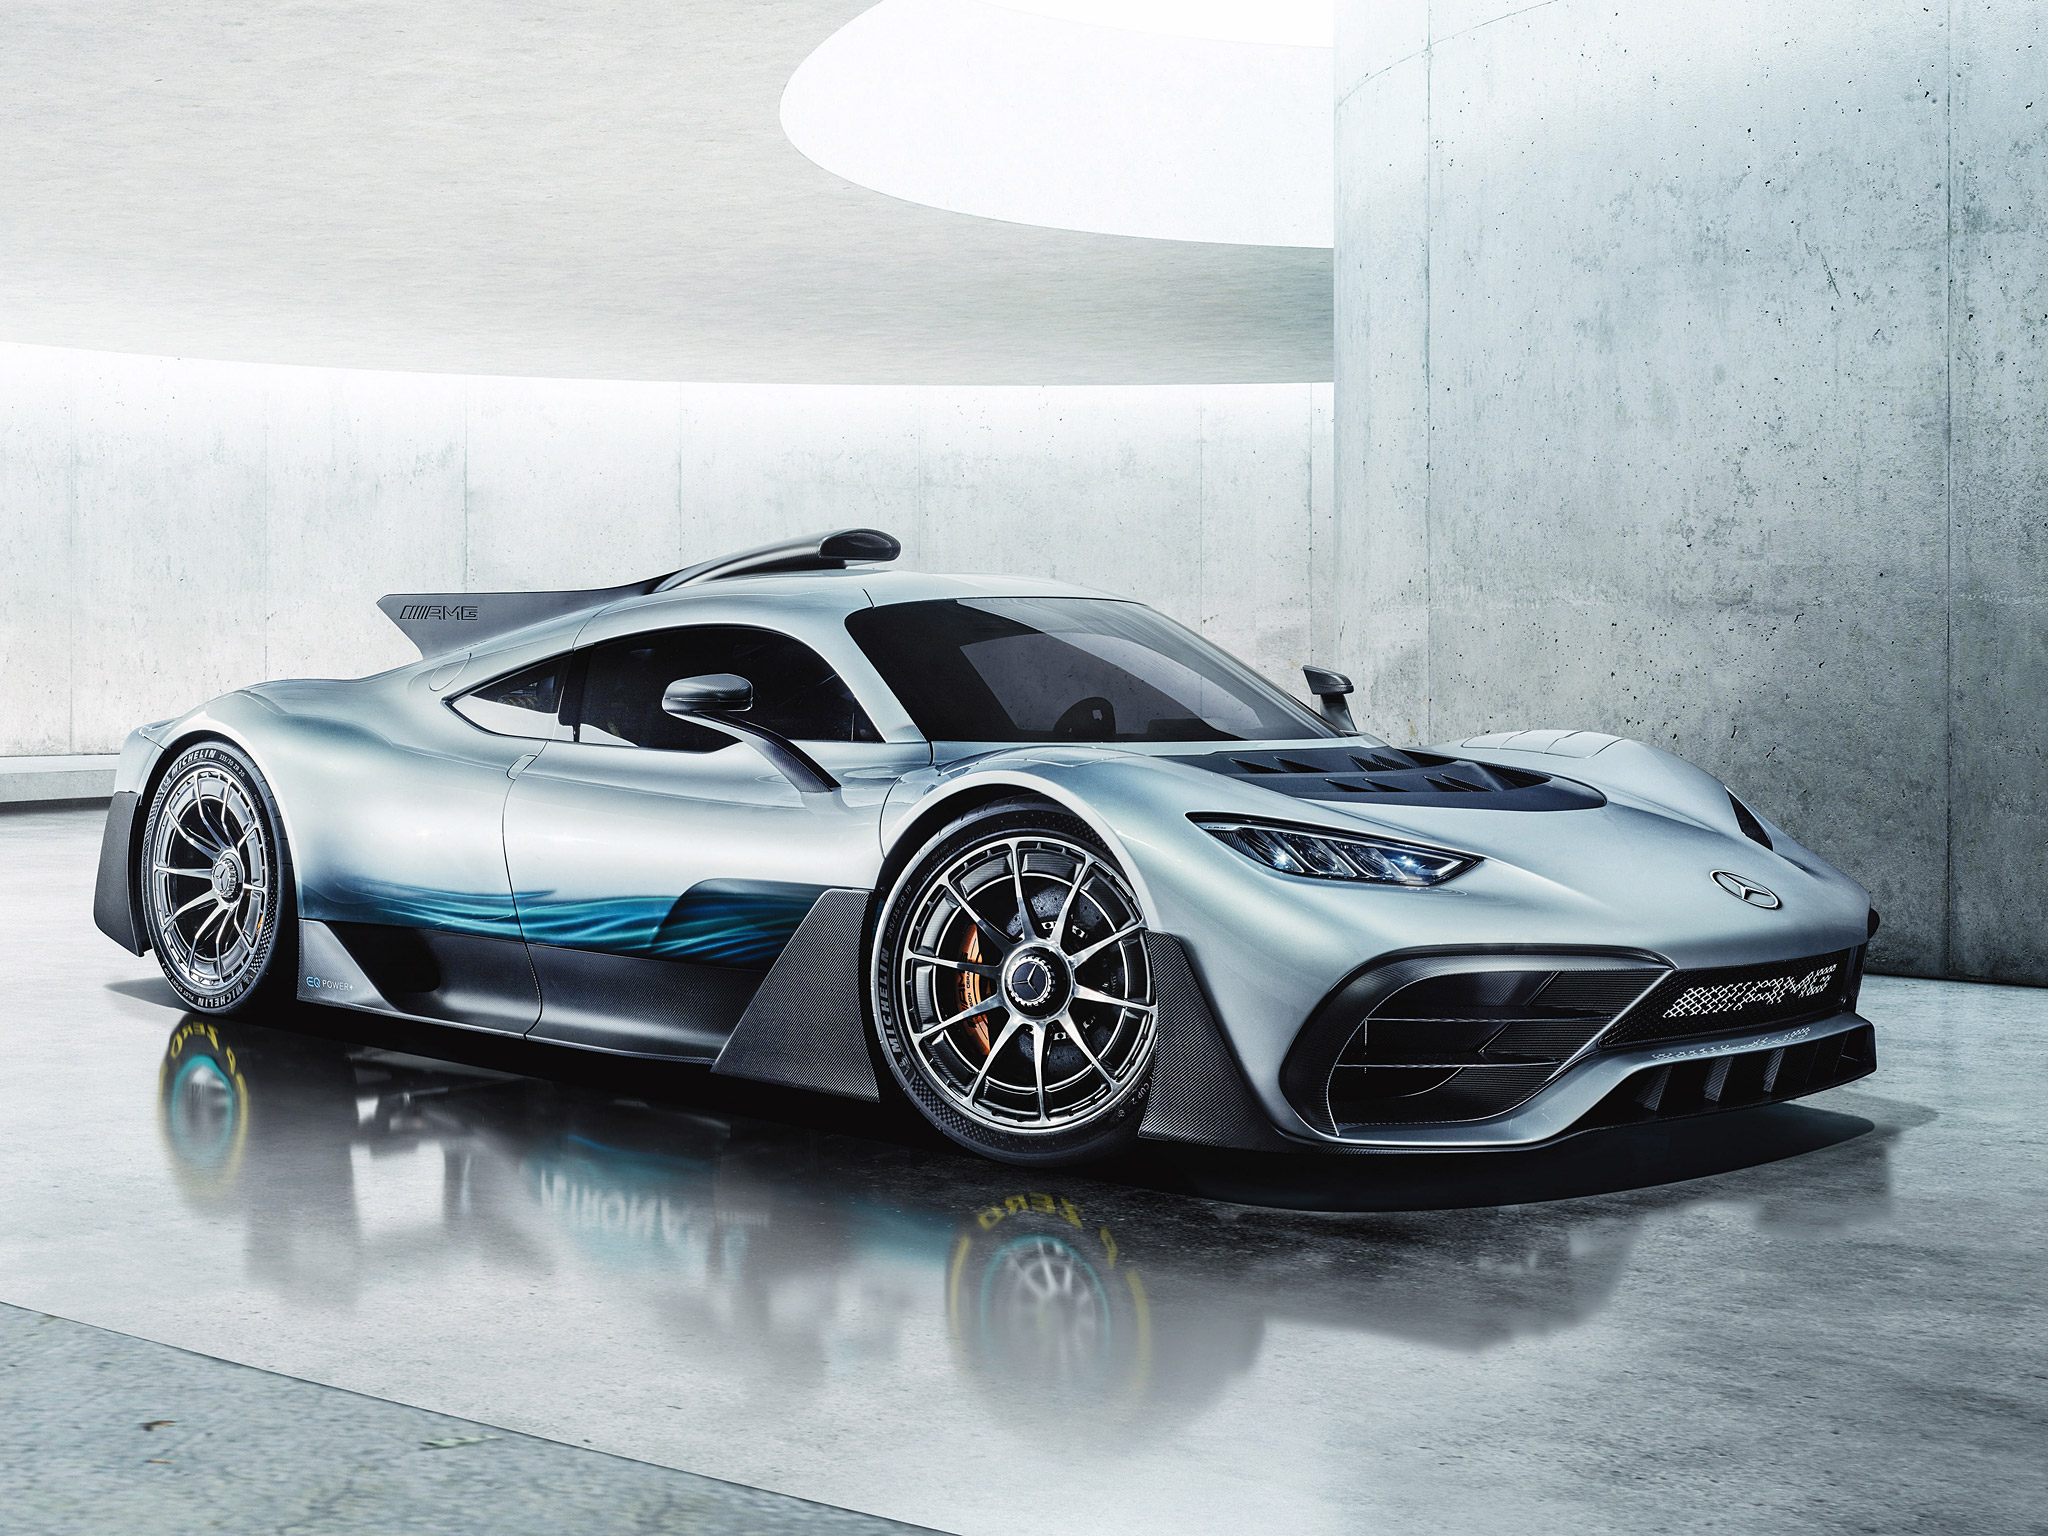  2017 Mercedes-AMG Project ONE Concept Wallpaper.